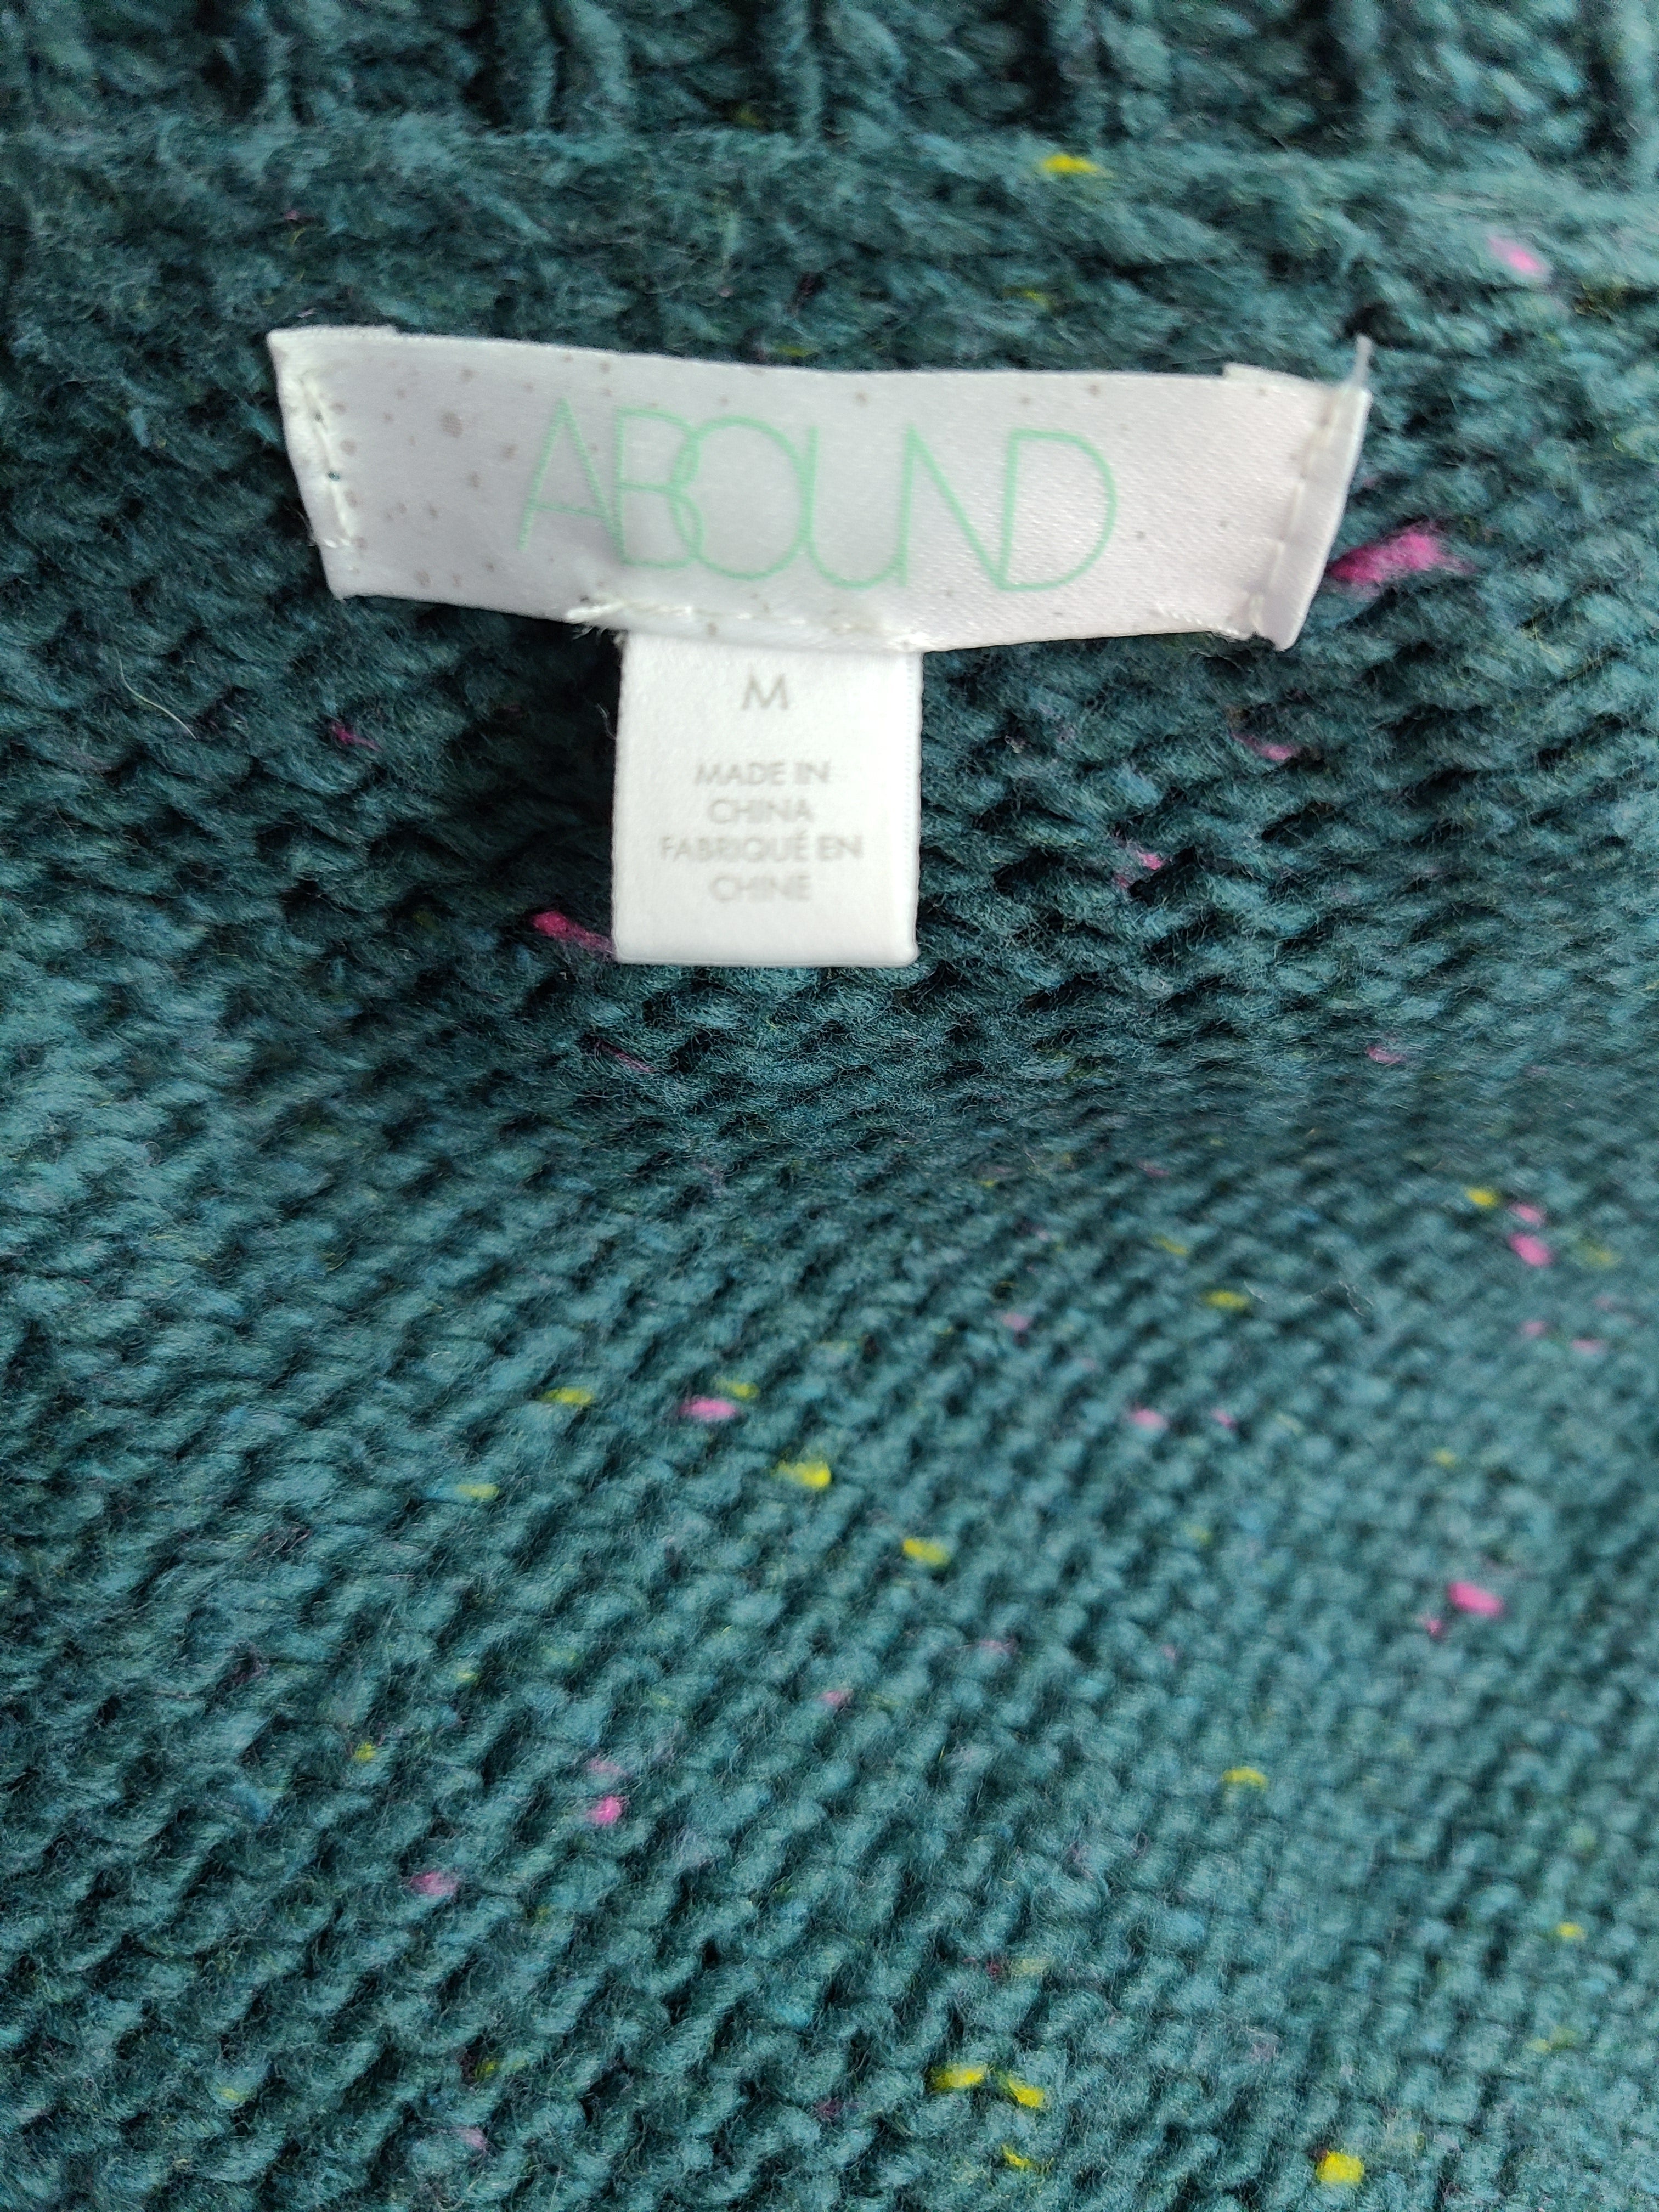 New Abound V-Neck Knit Nordstrom Flecked Chunky Pullover Sweater M Teal Green M Dresses by Brands Overstock | Brands Overstock